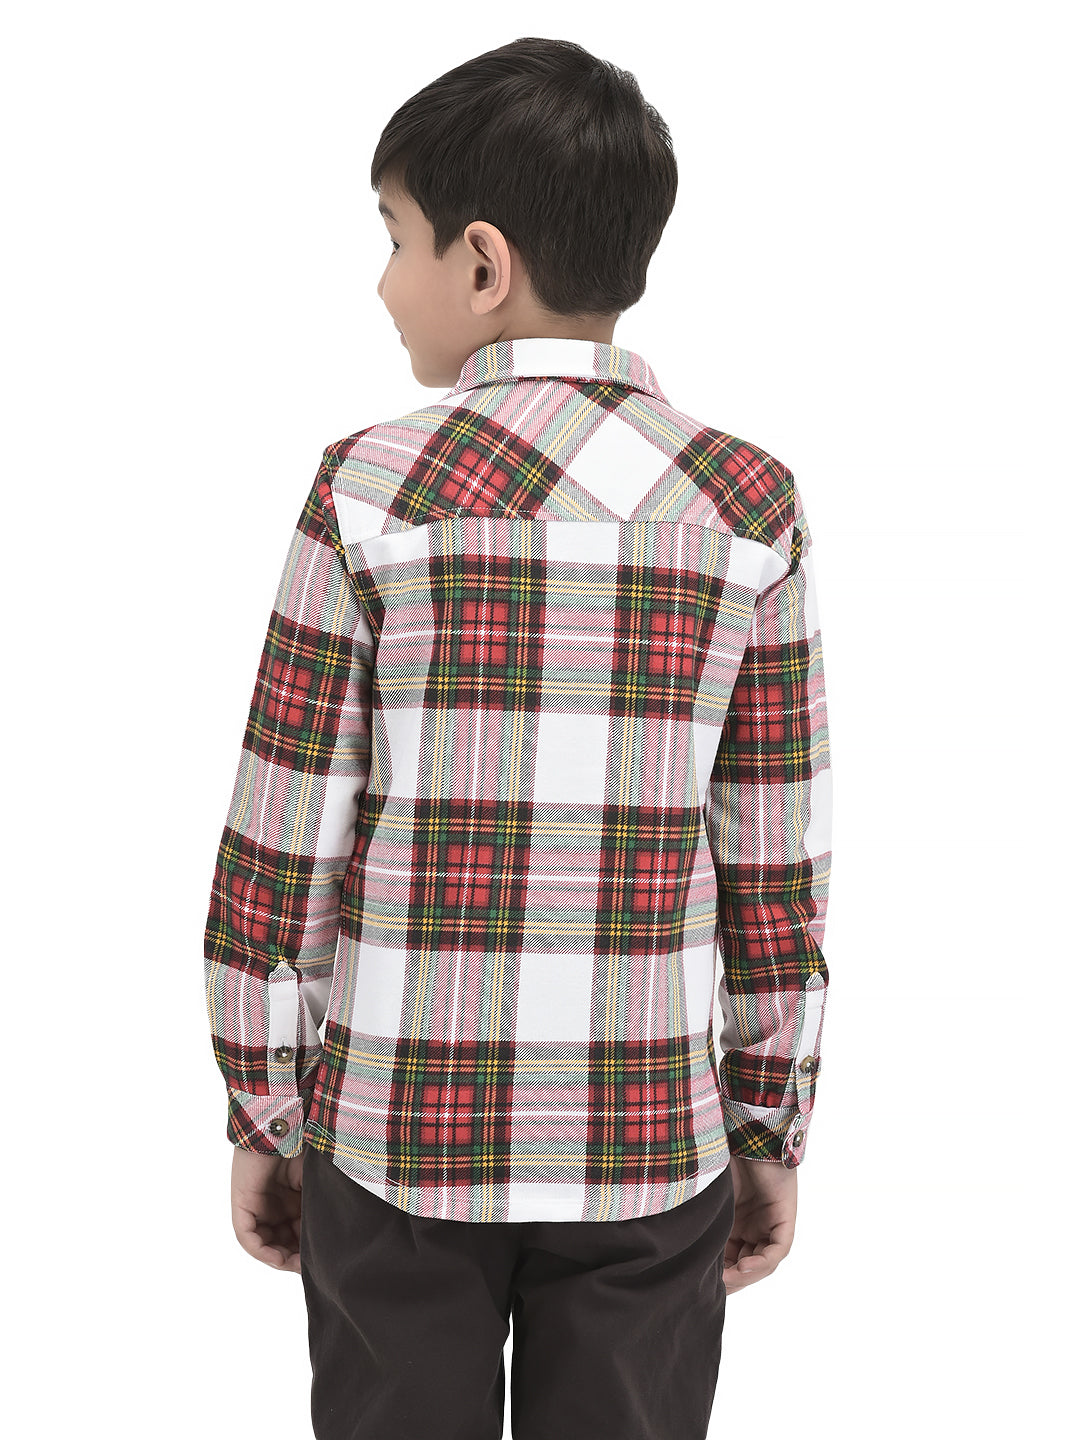 Boys Full Sleeves 100 % Cotton Bio washed Soft Shirt - Red